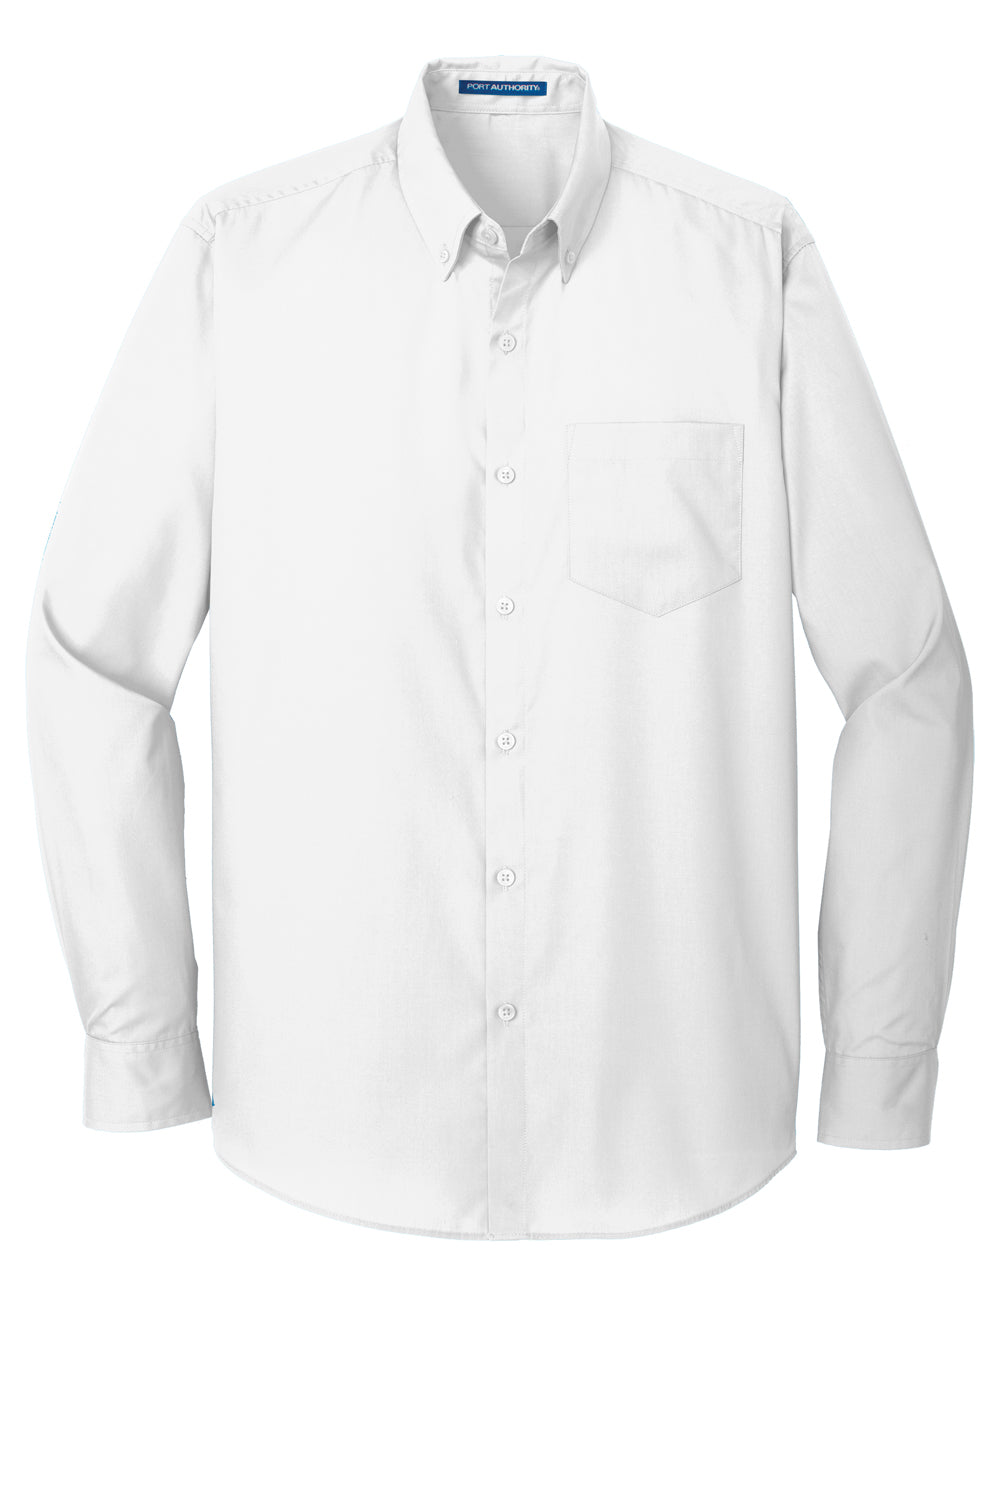 Port Authority W100/TW100 Carefree Stain Resistant Long Sleeve Button Down Shirt w/ Pocket White Flat Front